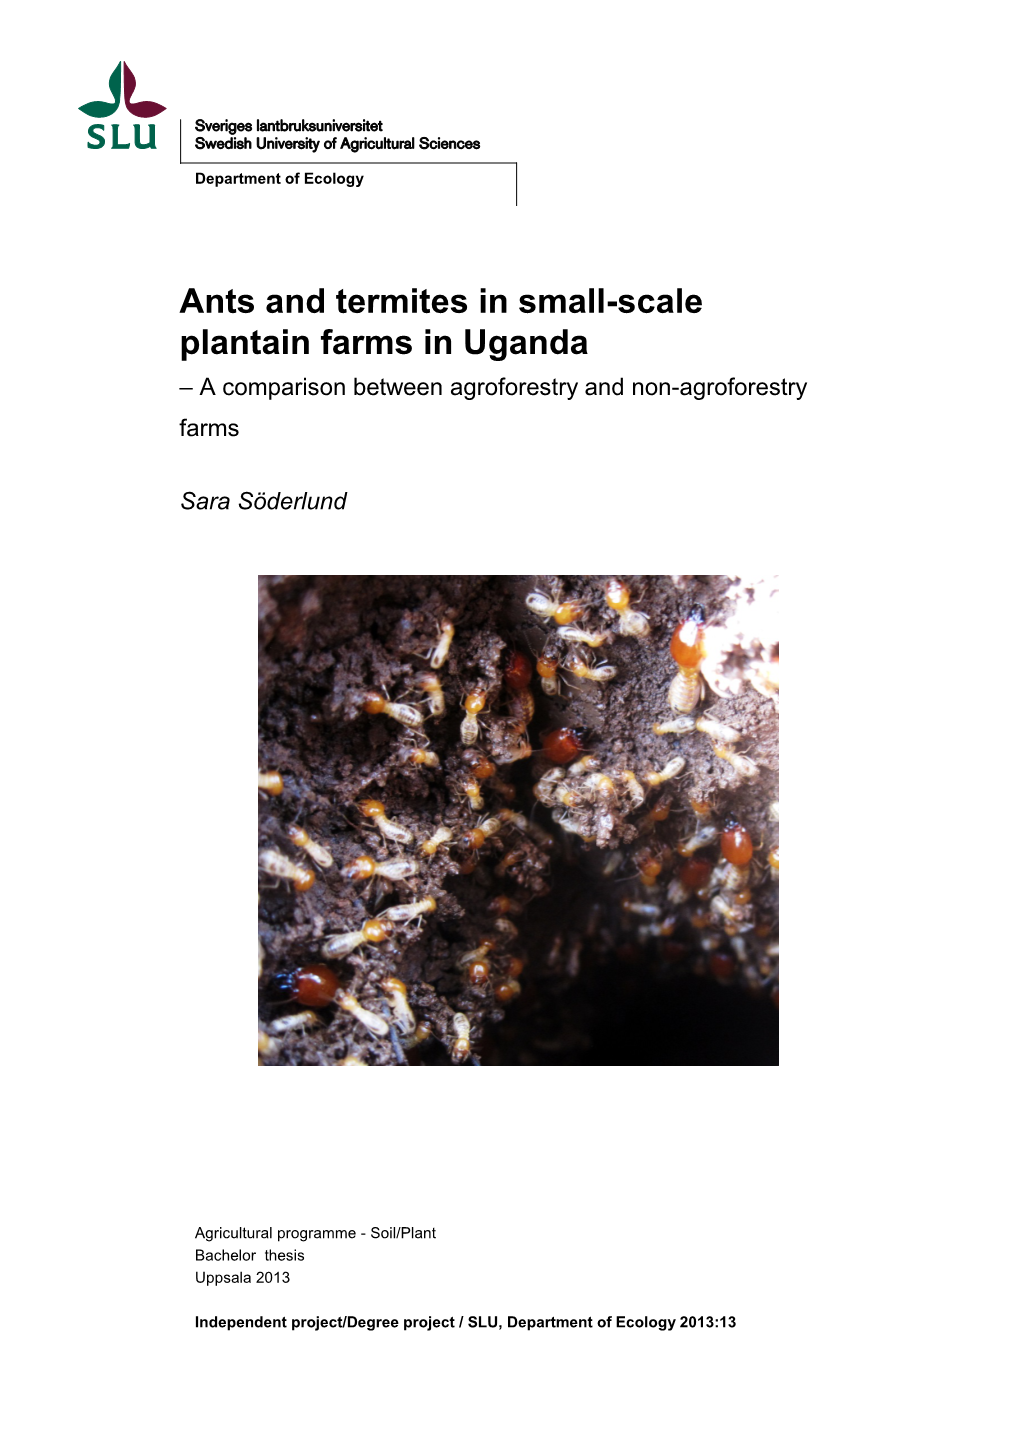 Ants and Termites in Small-Scale Plantain Farms in Uganda – a Comparison Between Agroforestry and Non-Agroforestry Farms